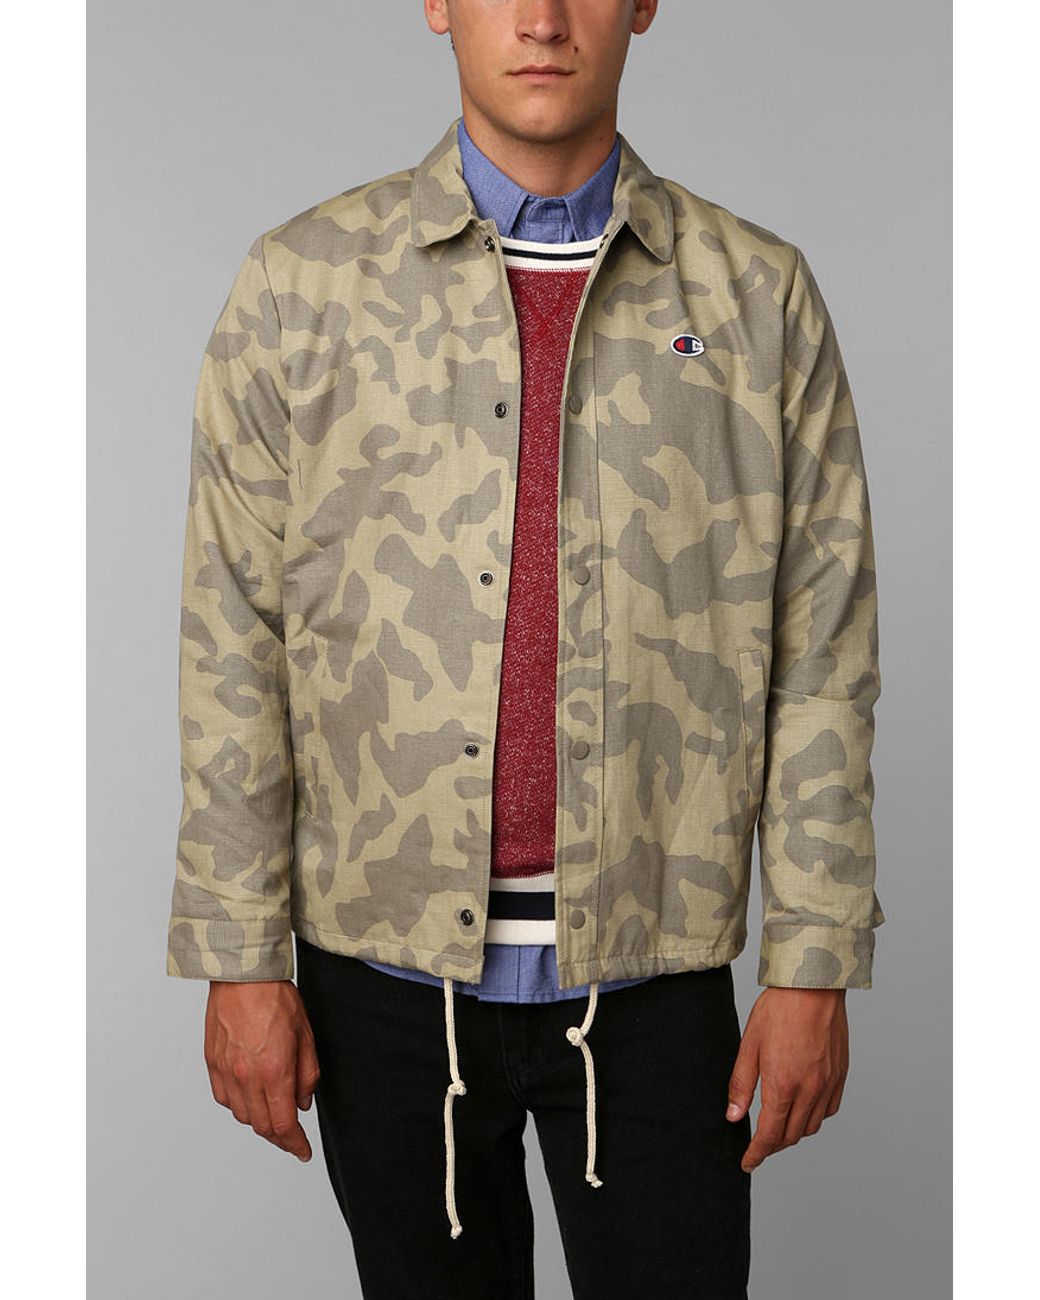 Urban Outfitters Champion X Uo Camo Coachs Jacket for Men |